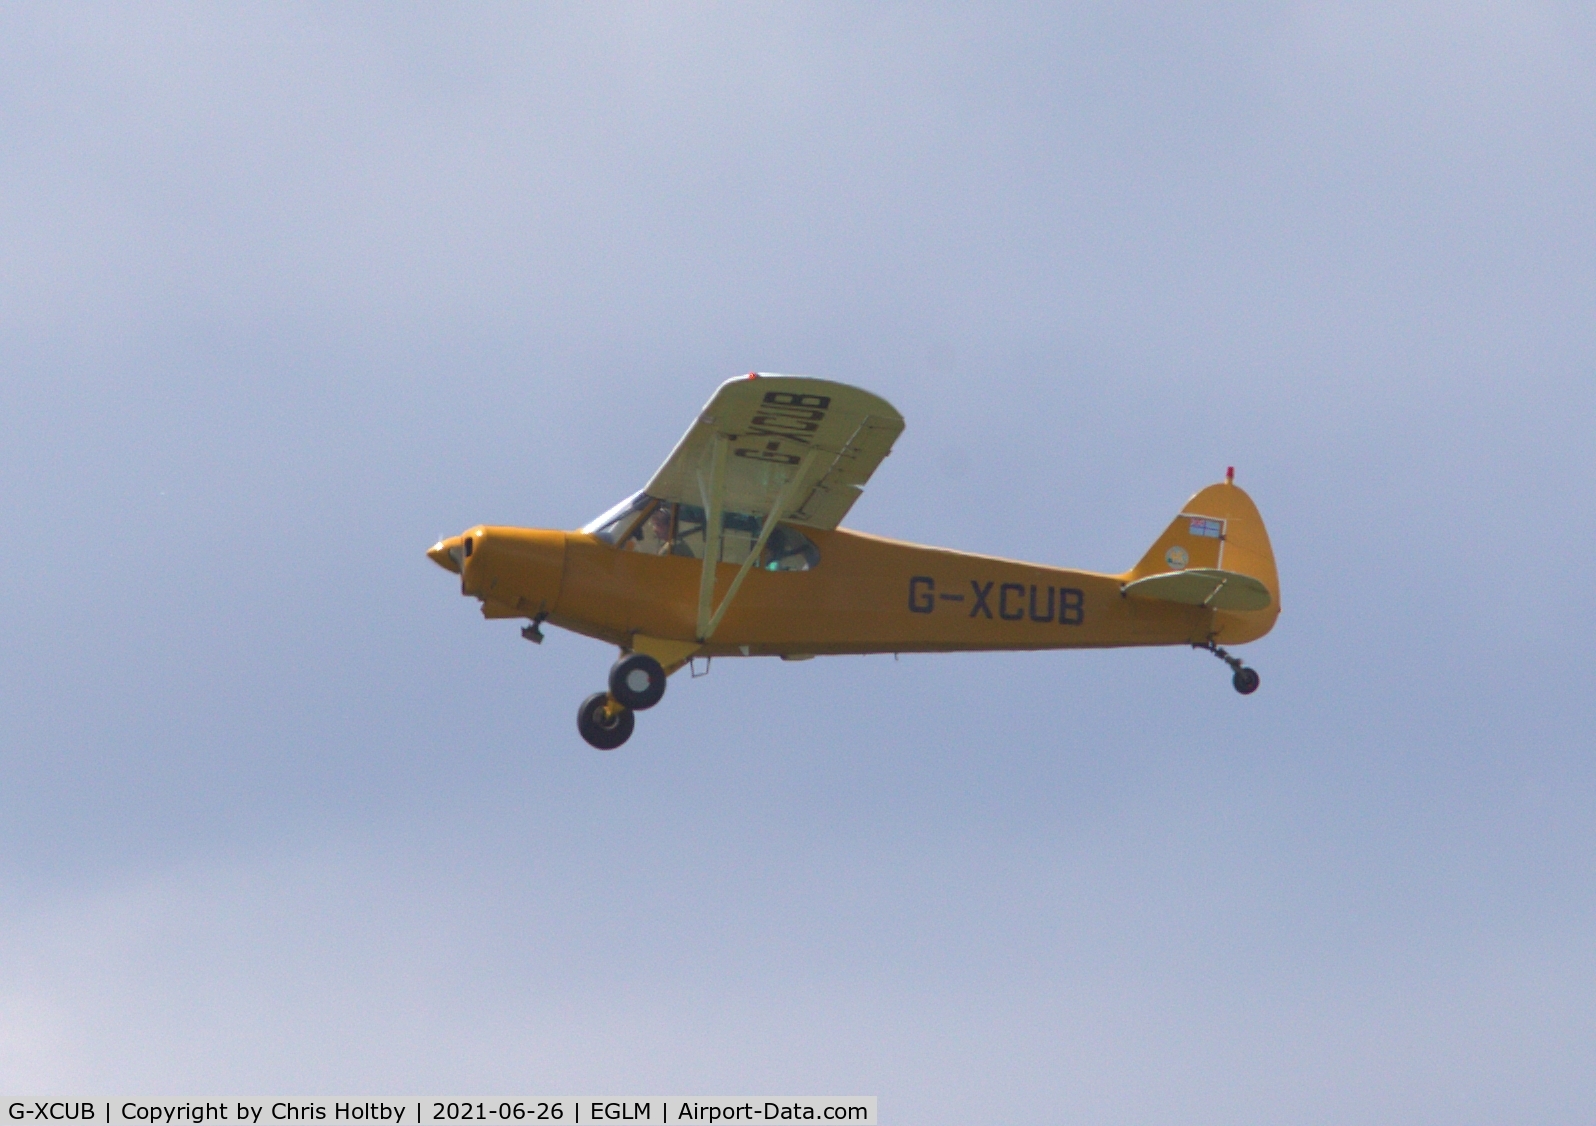 G-XCUB, 1981 Piper PA-18-150 Super Cub C/N 18-8109036, Just taken off from White Waltham, Berkshire where it is based